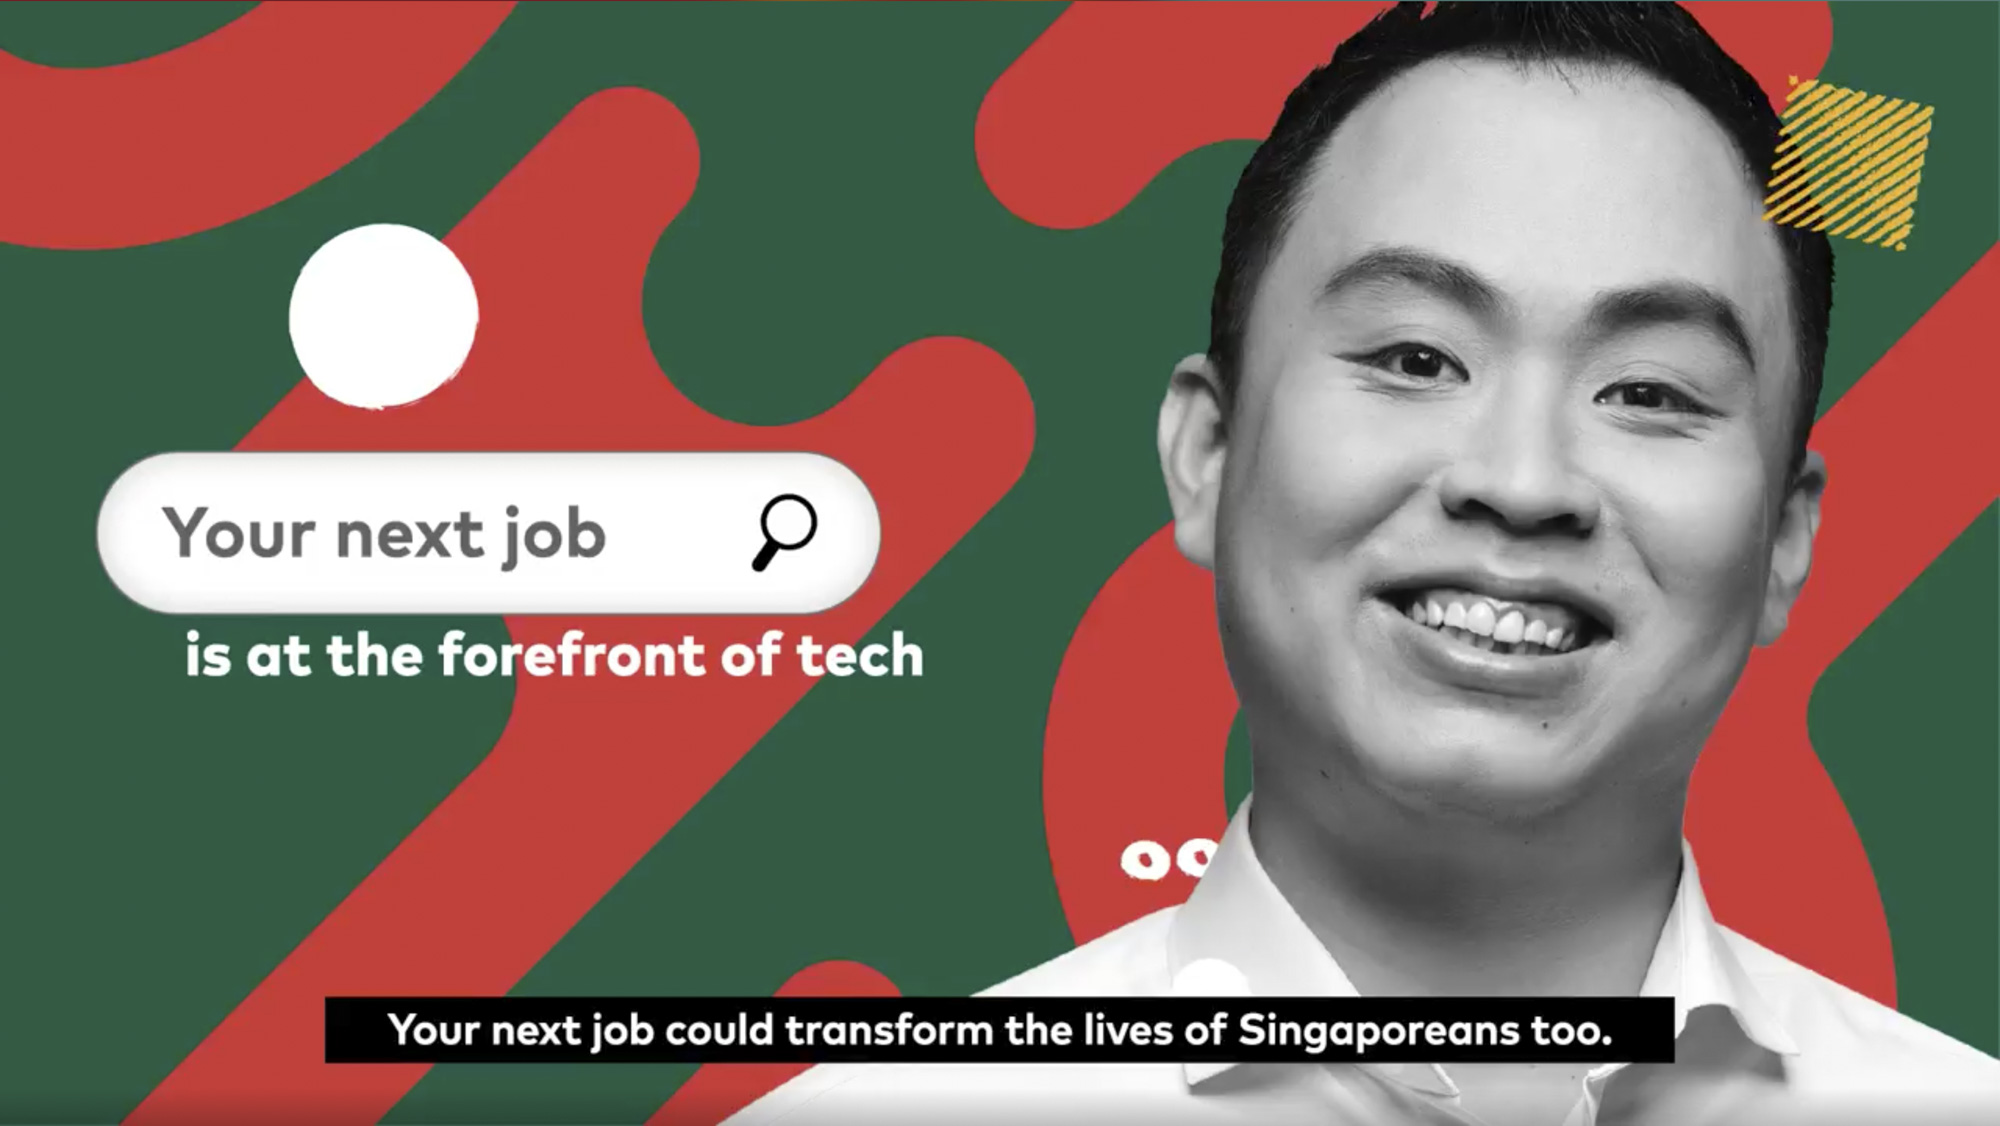 A screenshot of CPF's video with a guy next to a job search bar